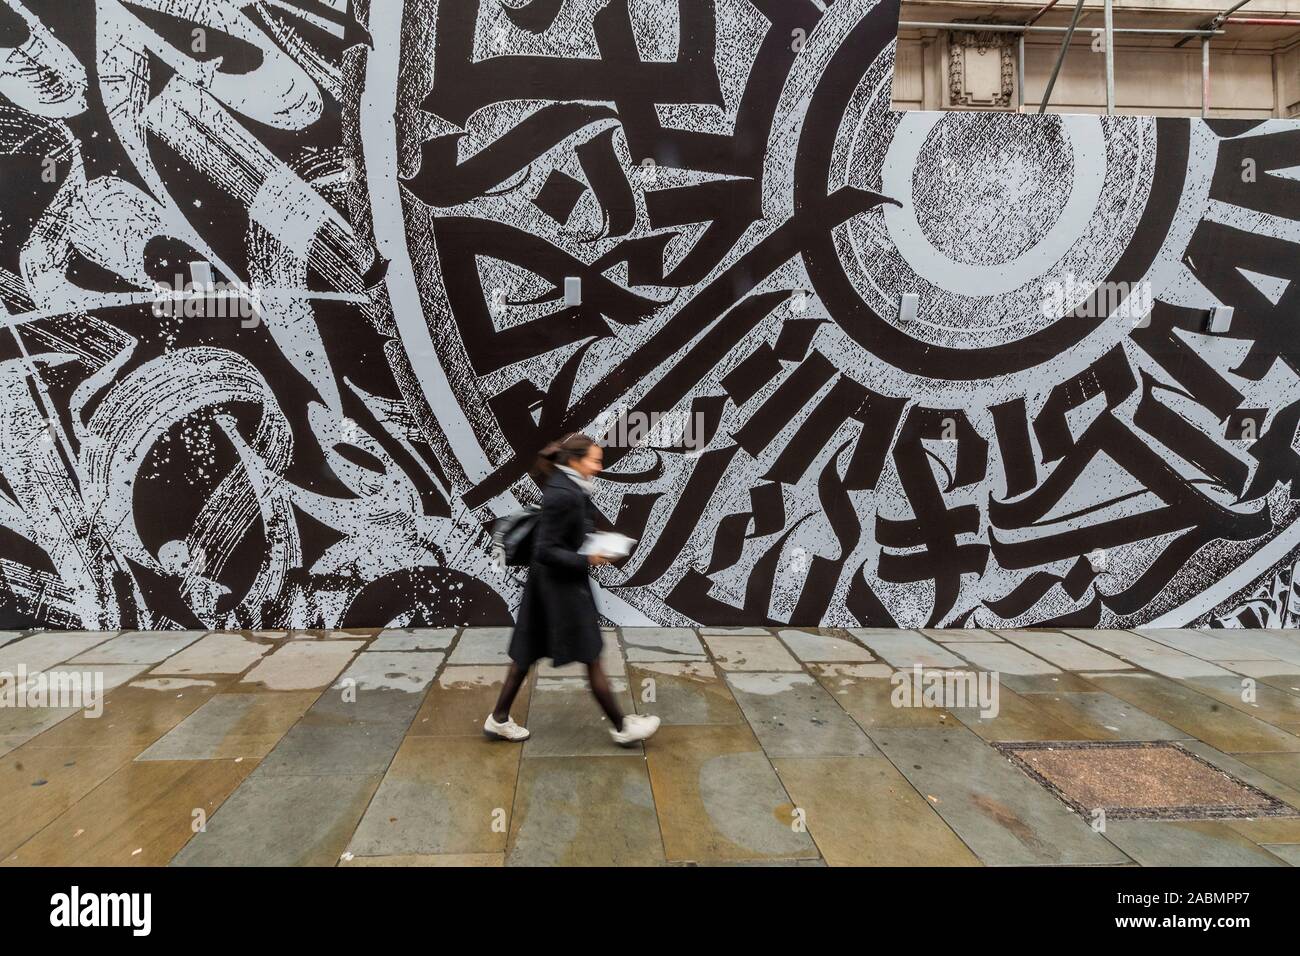 London, UK. 28th Nov 2019. EMBARGOED Online until 0001 29/11/19 OK for Print Tomorrow - Japanese fashion label Comme des Garcons in collaboration with Opera Gallery London unveils a large graffiti mural on the front of Dover Street Market’s building. It was created by the Russian calligraphy and graffiti artist Pokras Lampas, as part of Dover Street Market’s 15th anniversary celebrations. Credit: Guy Bell/Alamy Live News Stock Photo